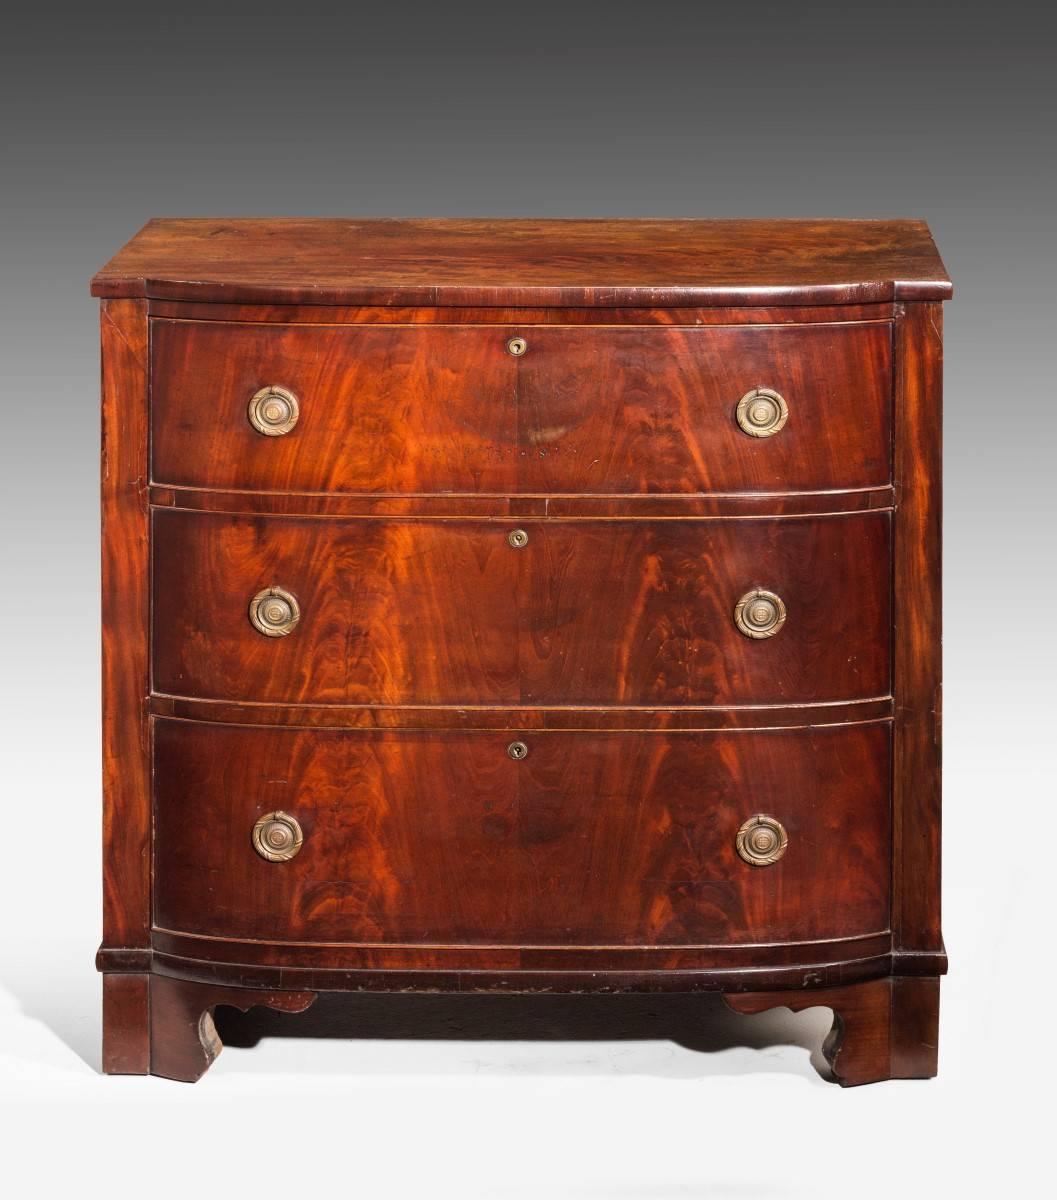 A most attractive Regency period bull-nosed D fronted mahogany chest of drawers. The very finely figured timbers leaf matched to left and right hand side. Excellent overall condition. Very well figured top which is somewhat patinated with age.